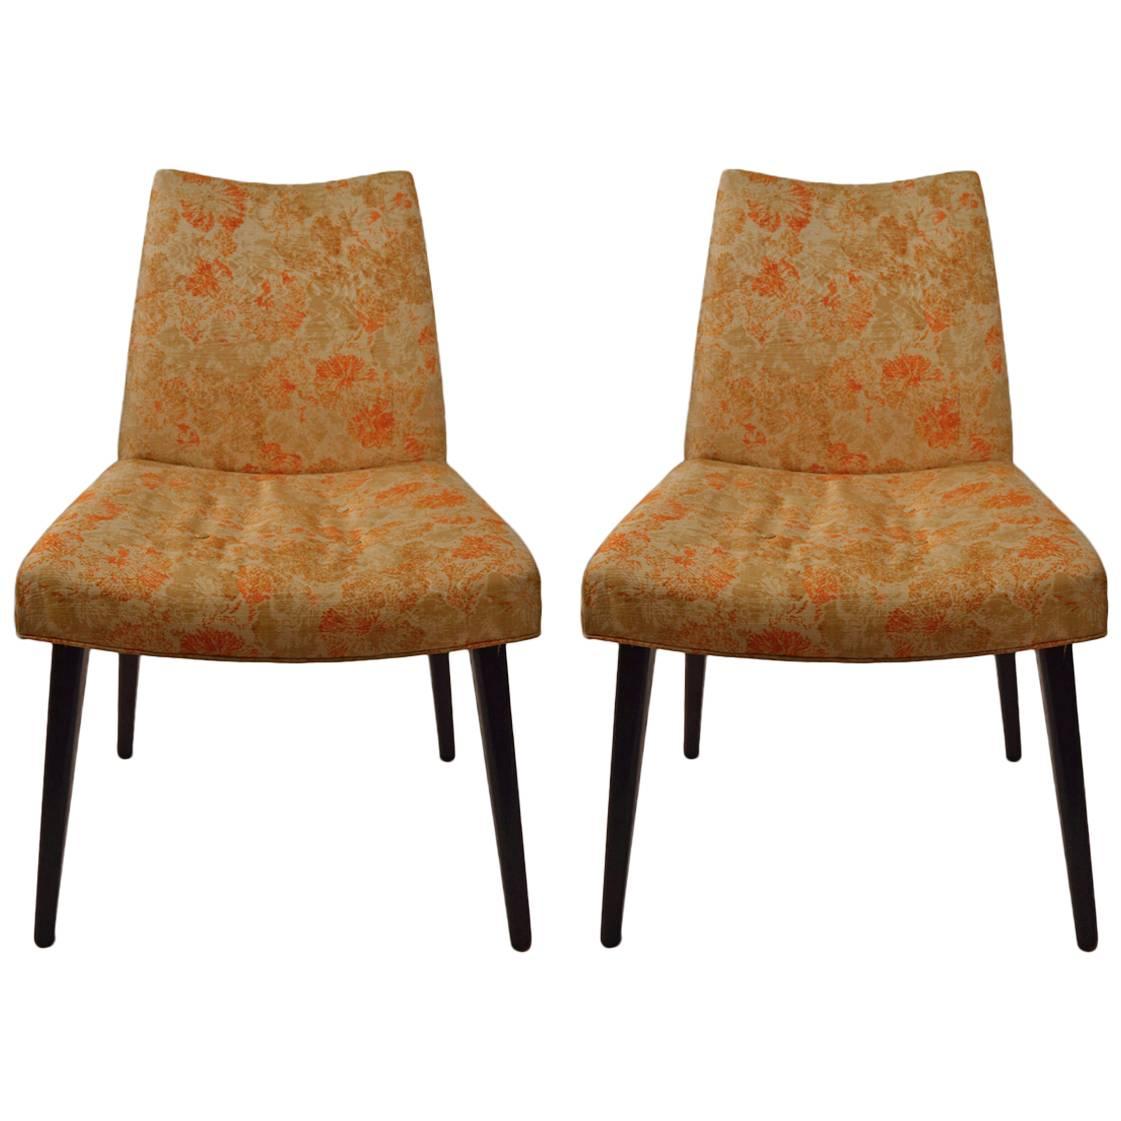 Pair of Decorative Chairs After Wormley For Sale